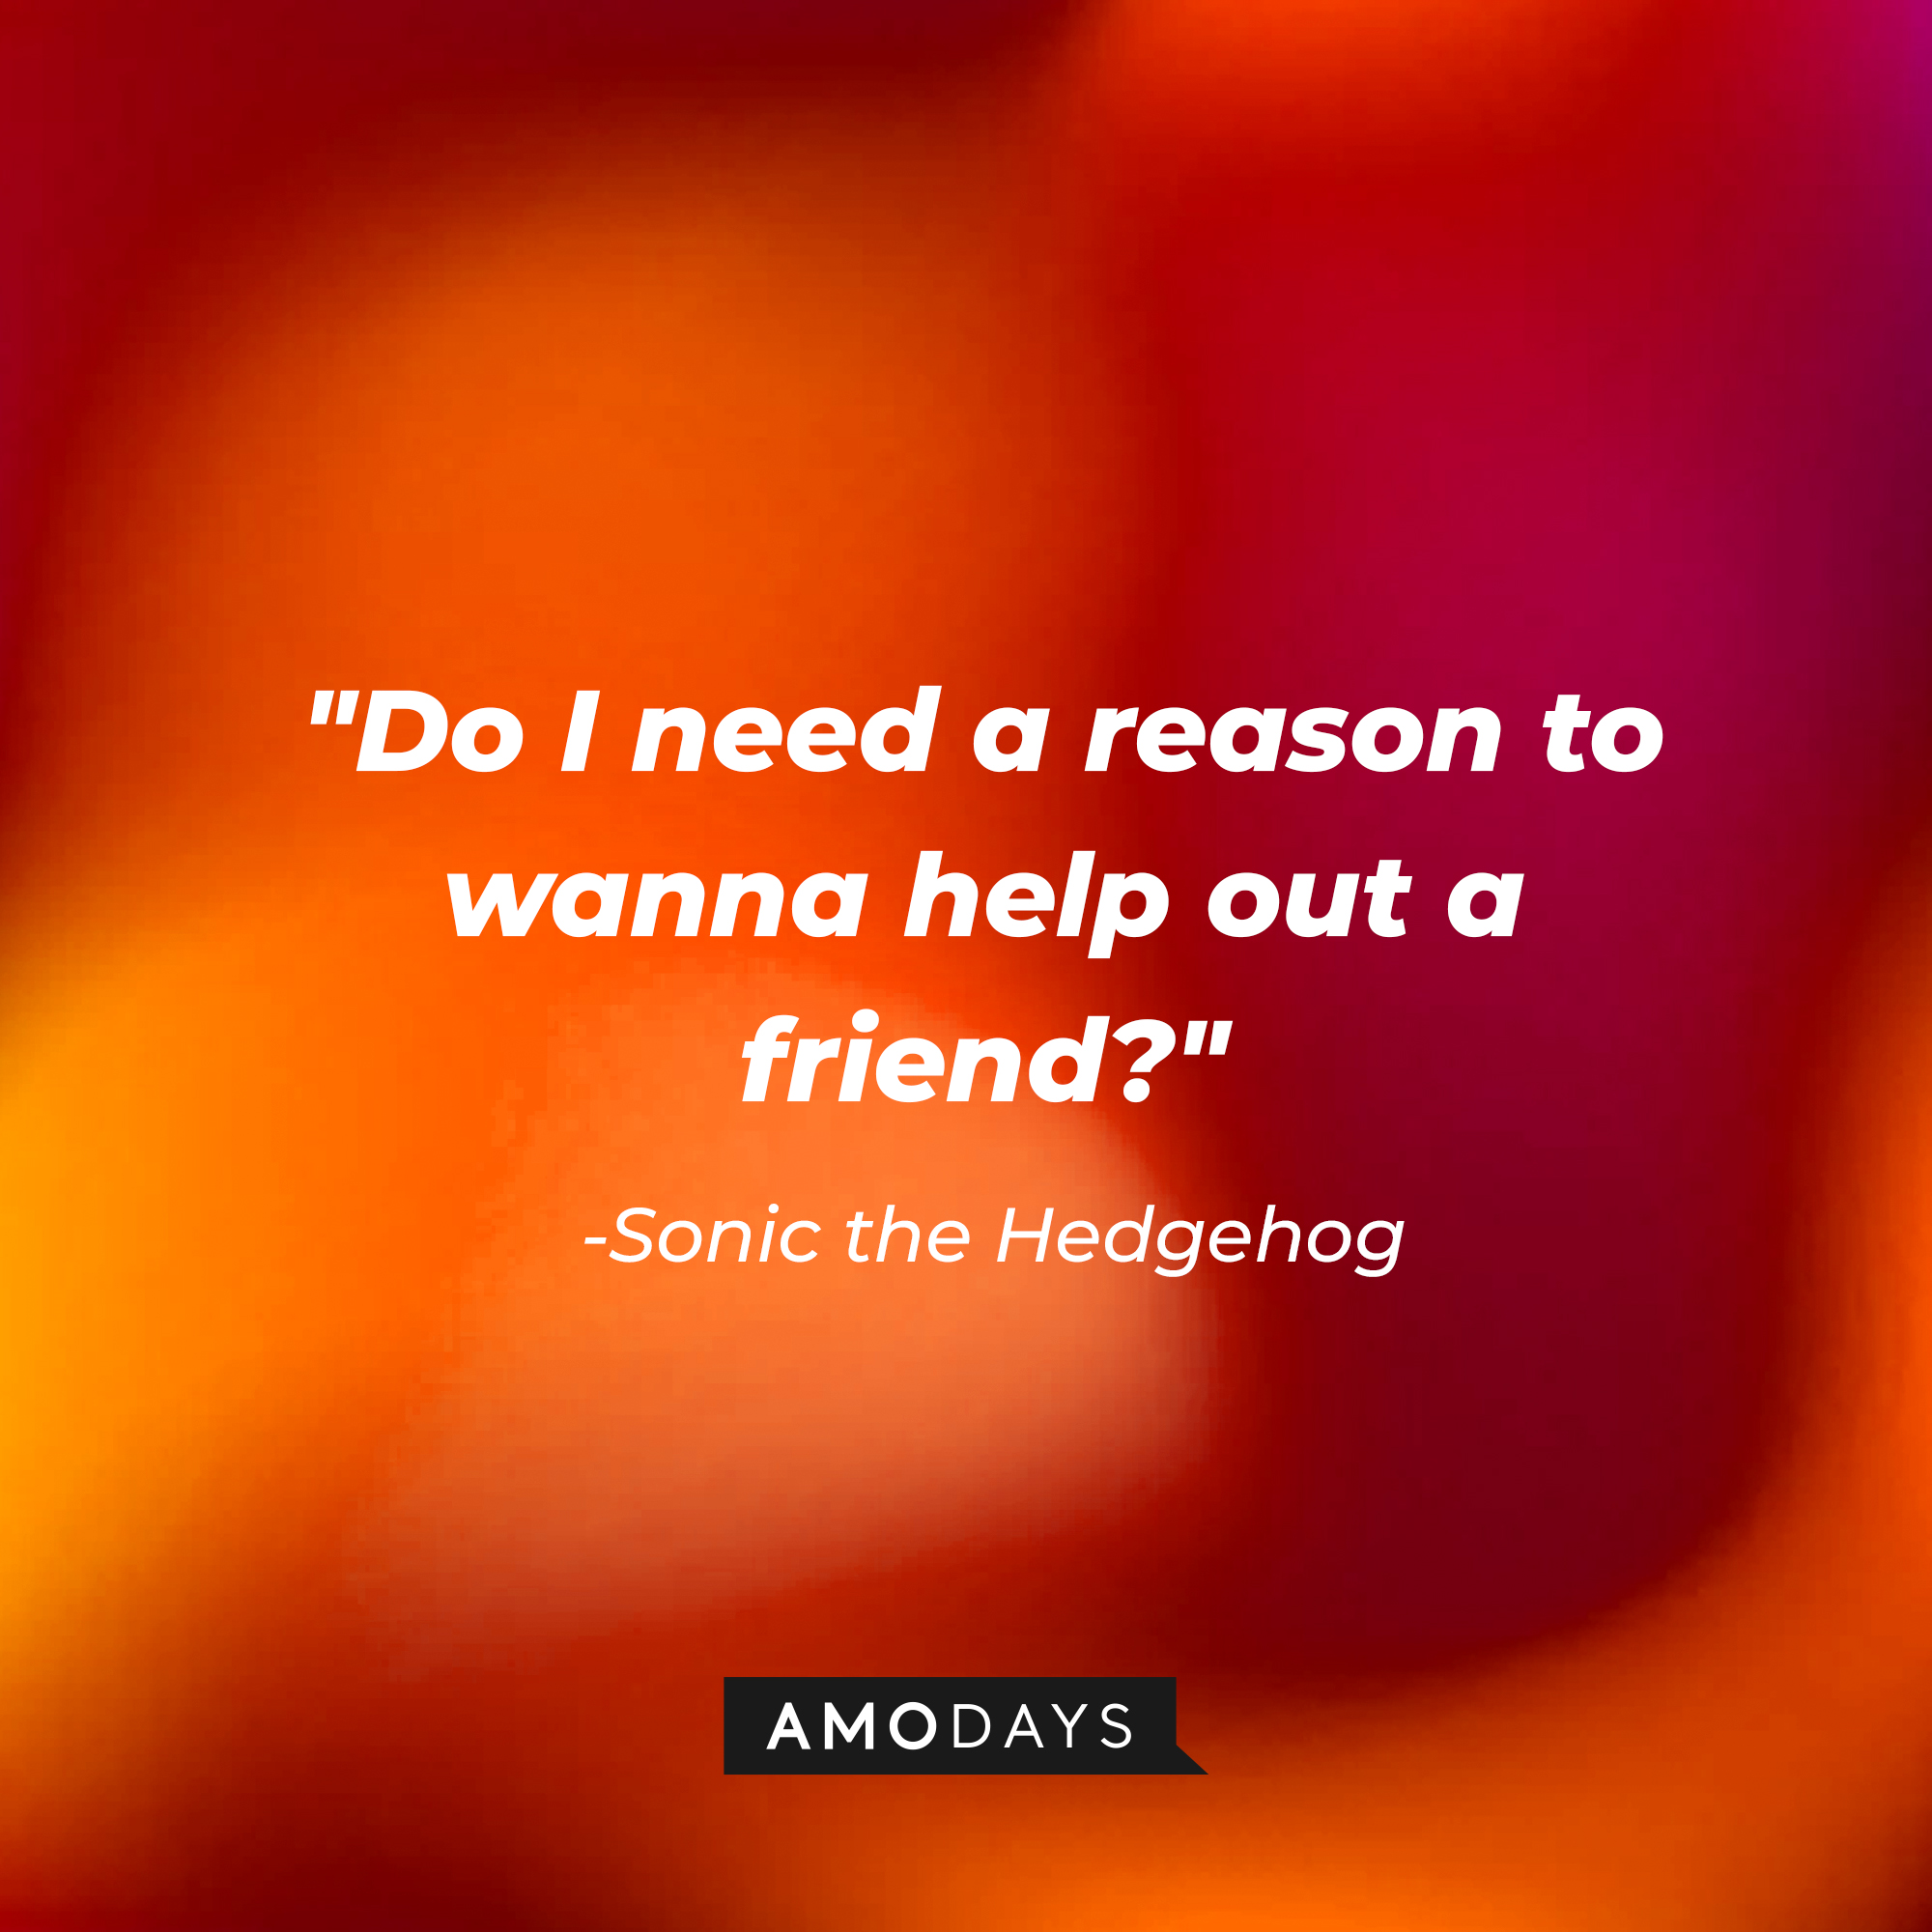 Sonic's quote: "Do I need a reason to wanna help out a friend?" | Source: Amodays